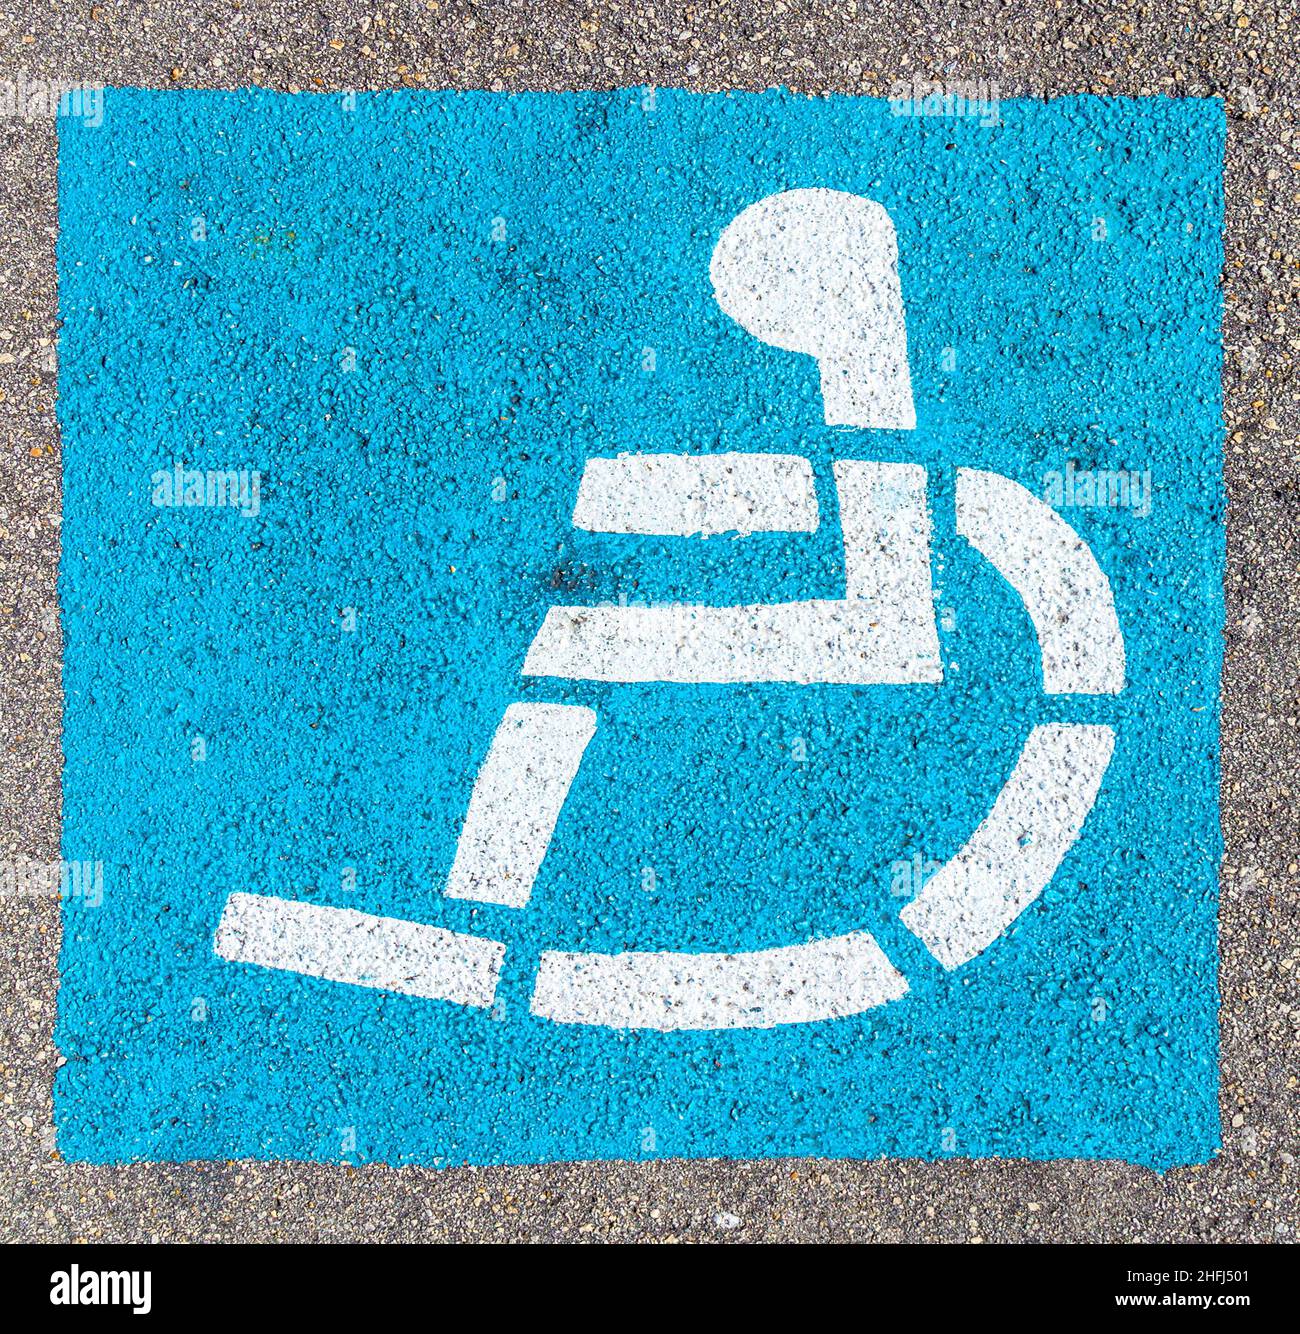 wheelchair sign at the parking lot in blue Stock Photo